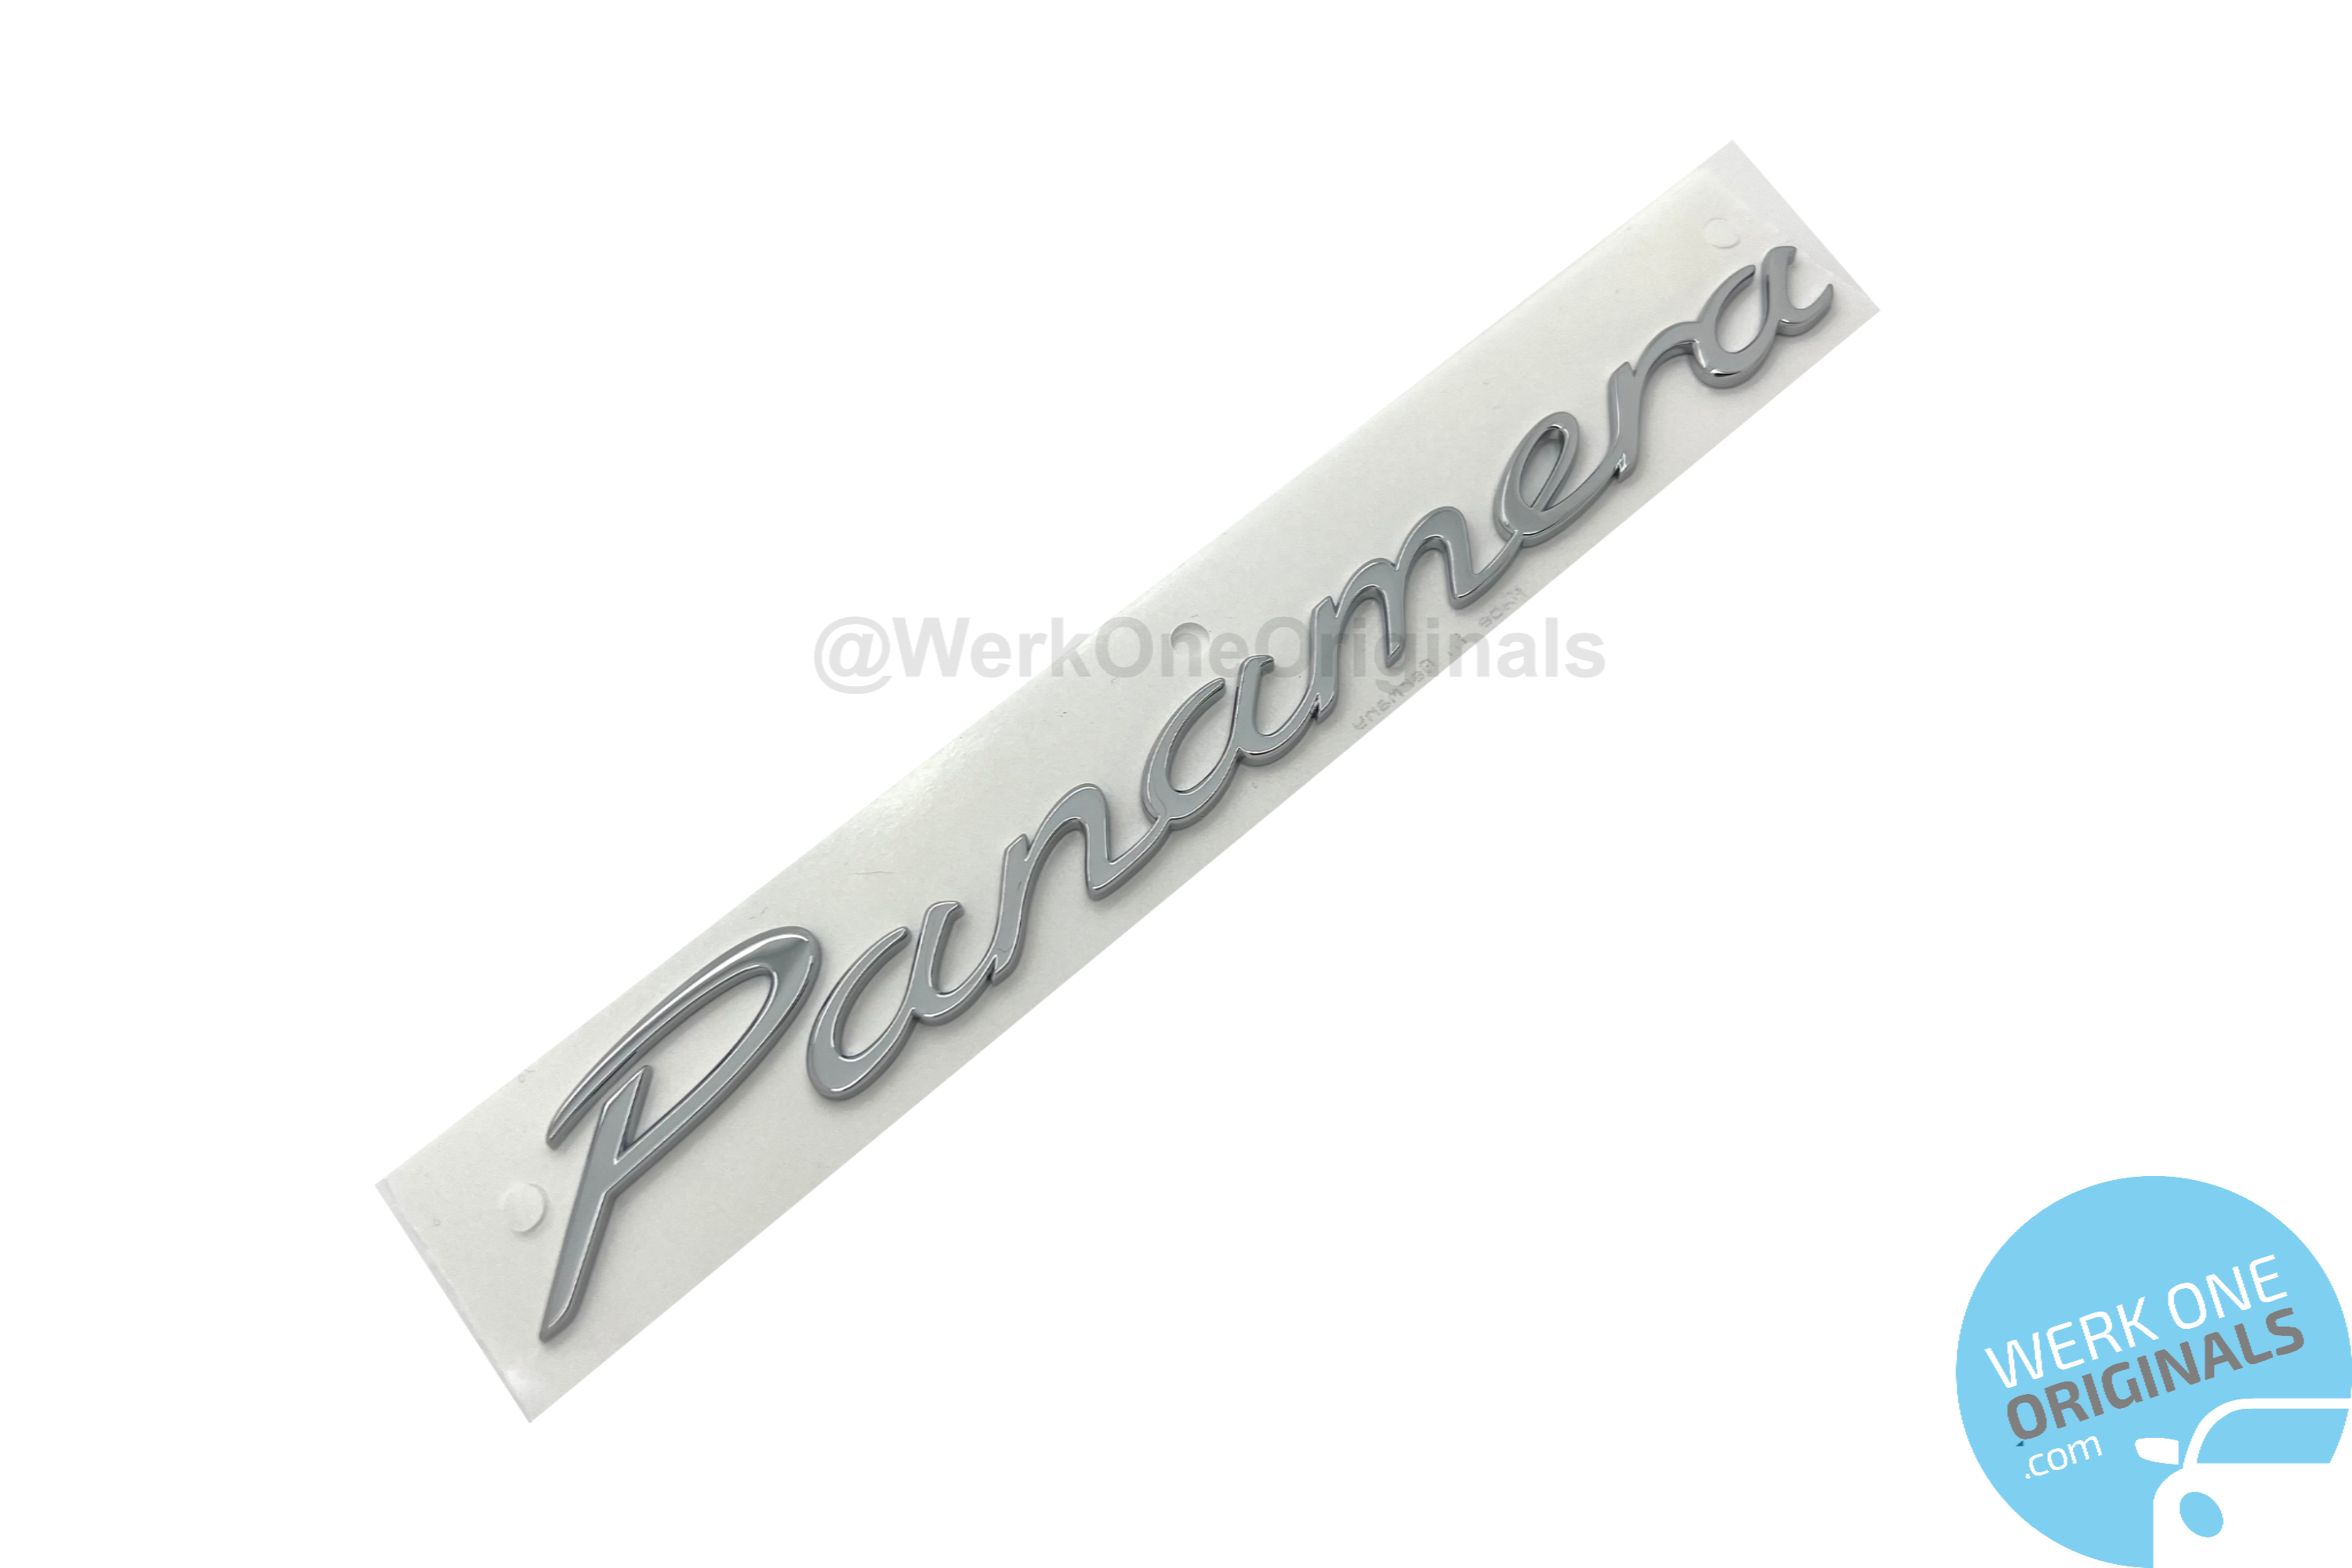 Porsche 'Panamera' Rear Badge Decal in Chrome Silver for Panamera Type 970 & 971 Models